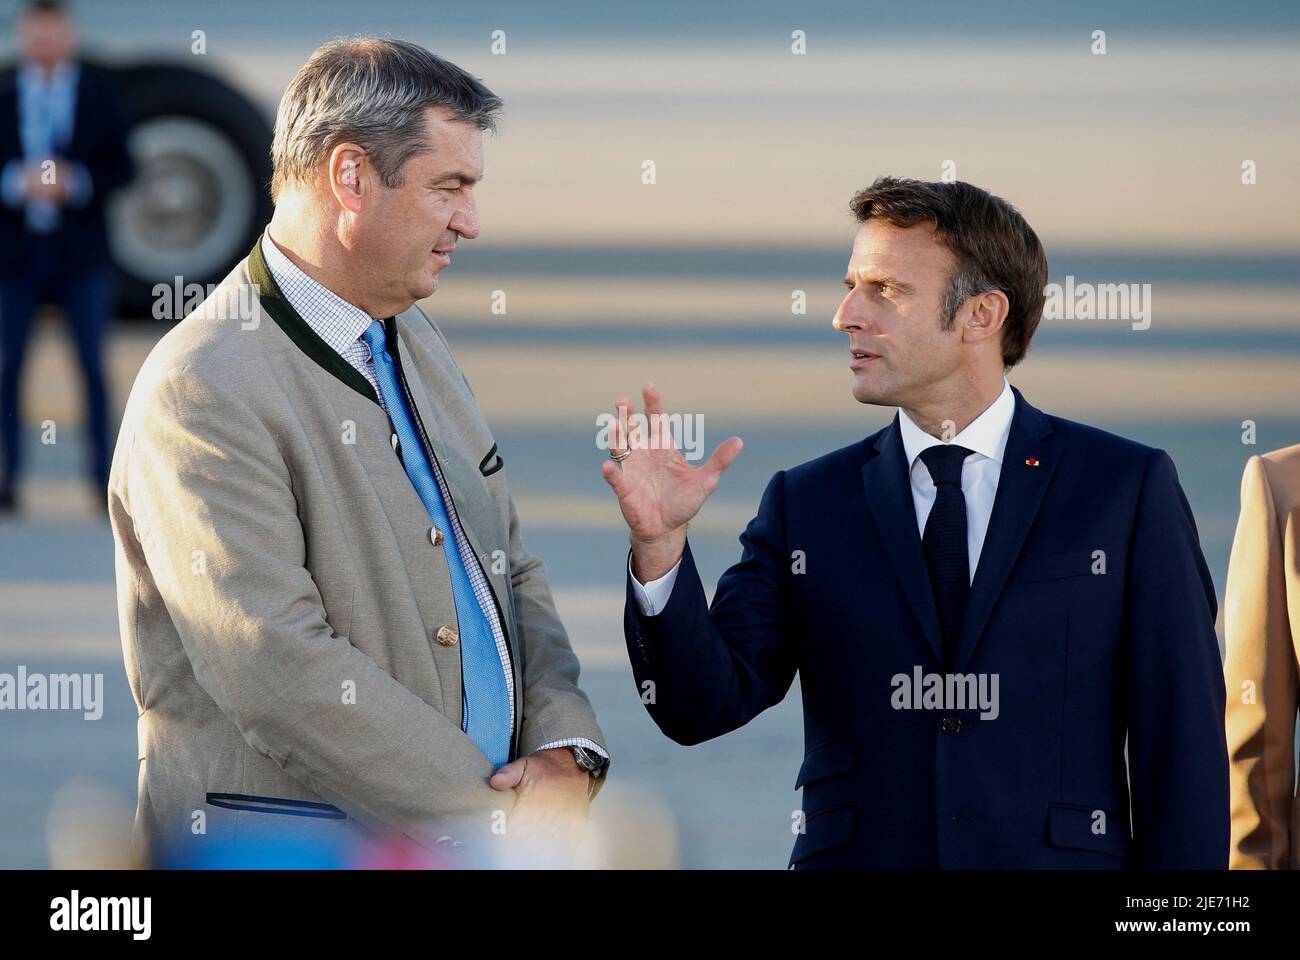 French President Emmanuel Macron is greeted by Bavaria's State Premier Markus Soeder upon his arrival at Franz-Josef-Strauss airport in Munich ahead of the G7 summit, which will take place in the Bavarian alpine resort of Elmau Castle, Germany, June 25, 2022. REUTERS/Michaela Rehle Stock Photo